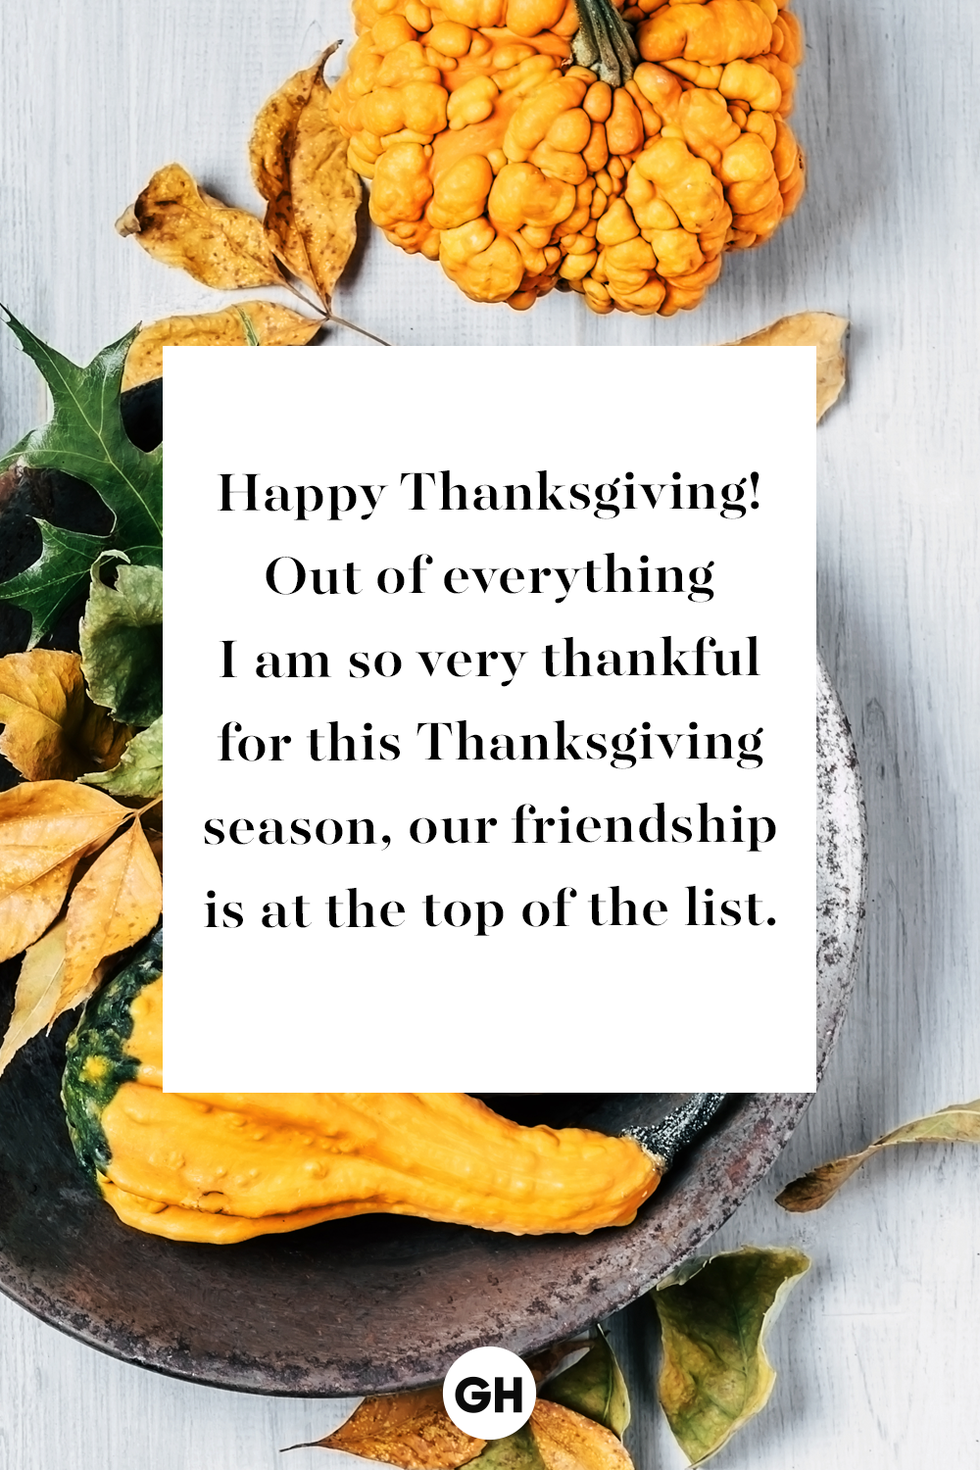 56 Best Thanksgiving Wishes and Greetings to Send Friends & Family